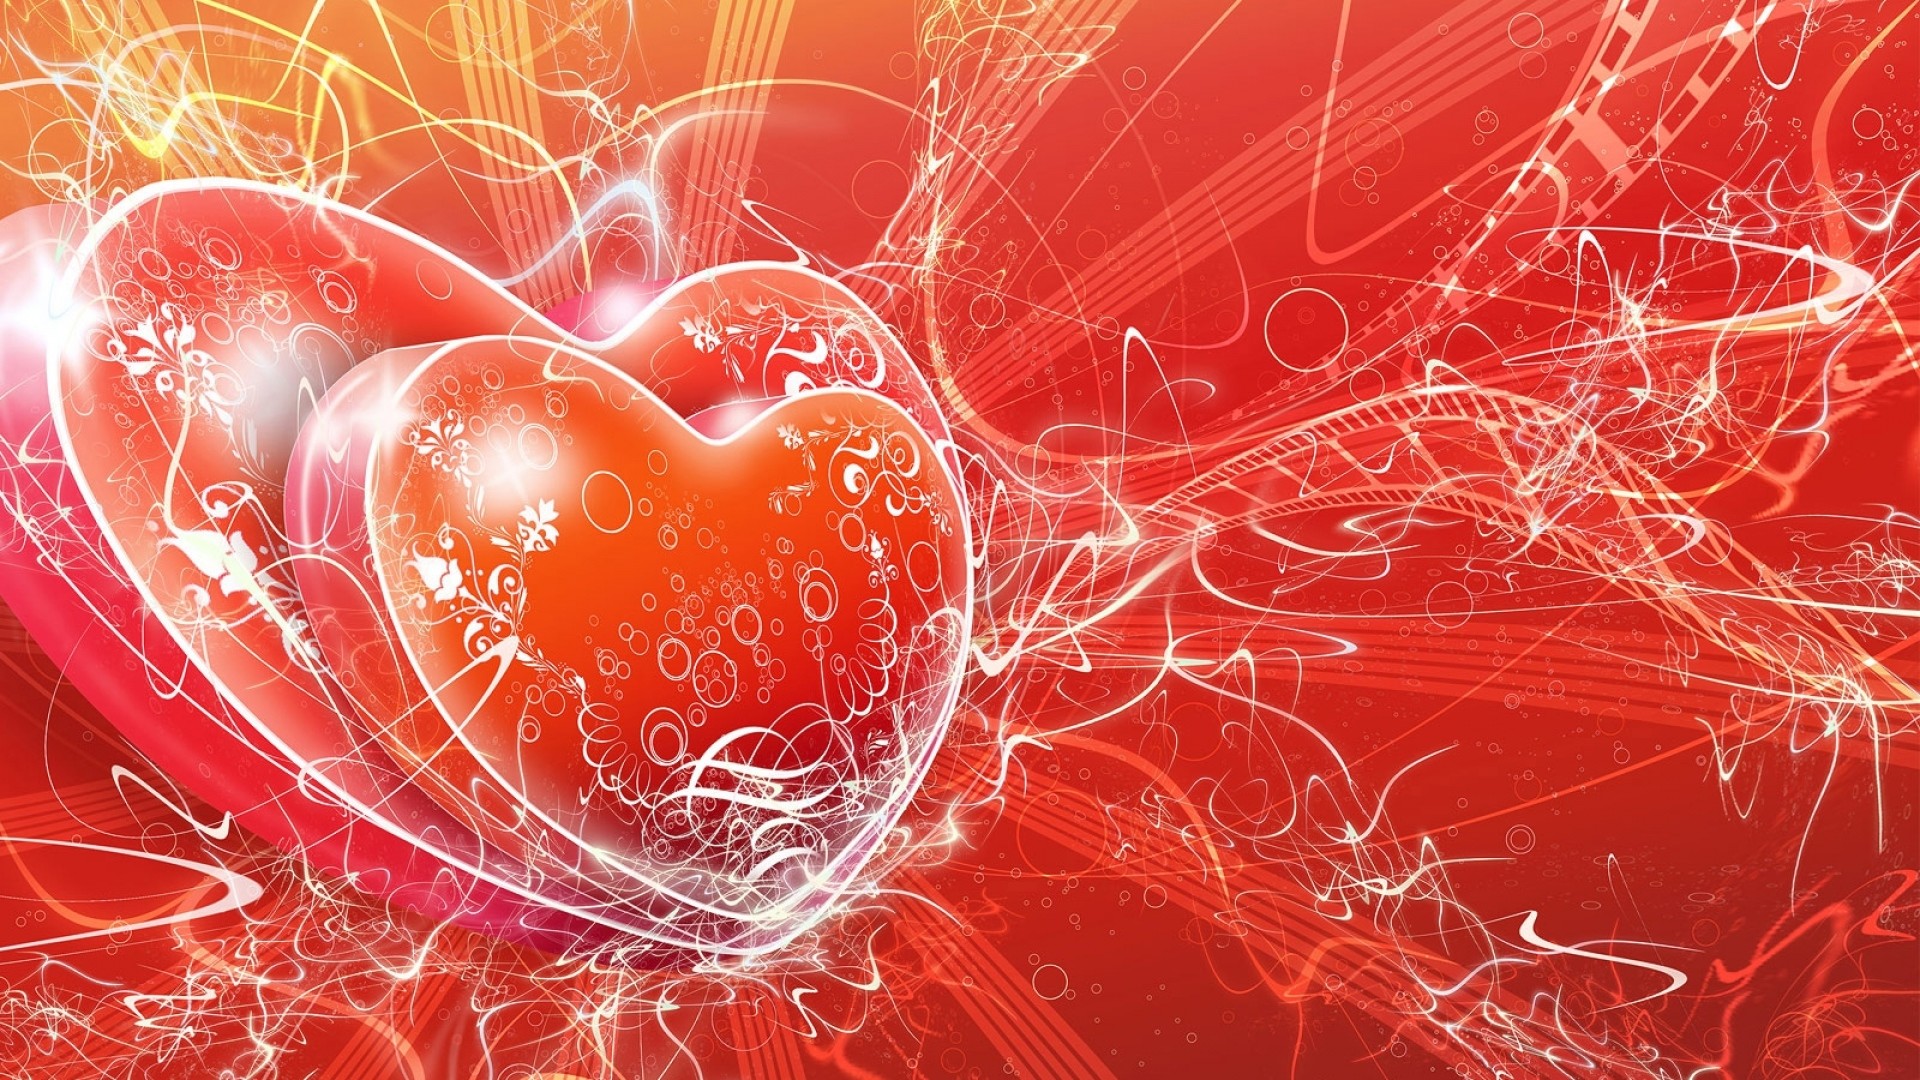 Red Love Heart Background (41+ pictures)